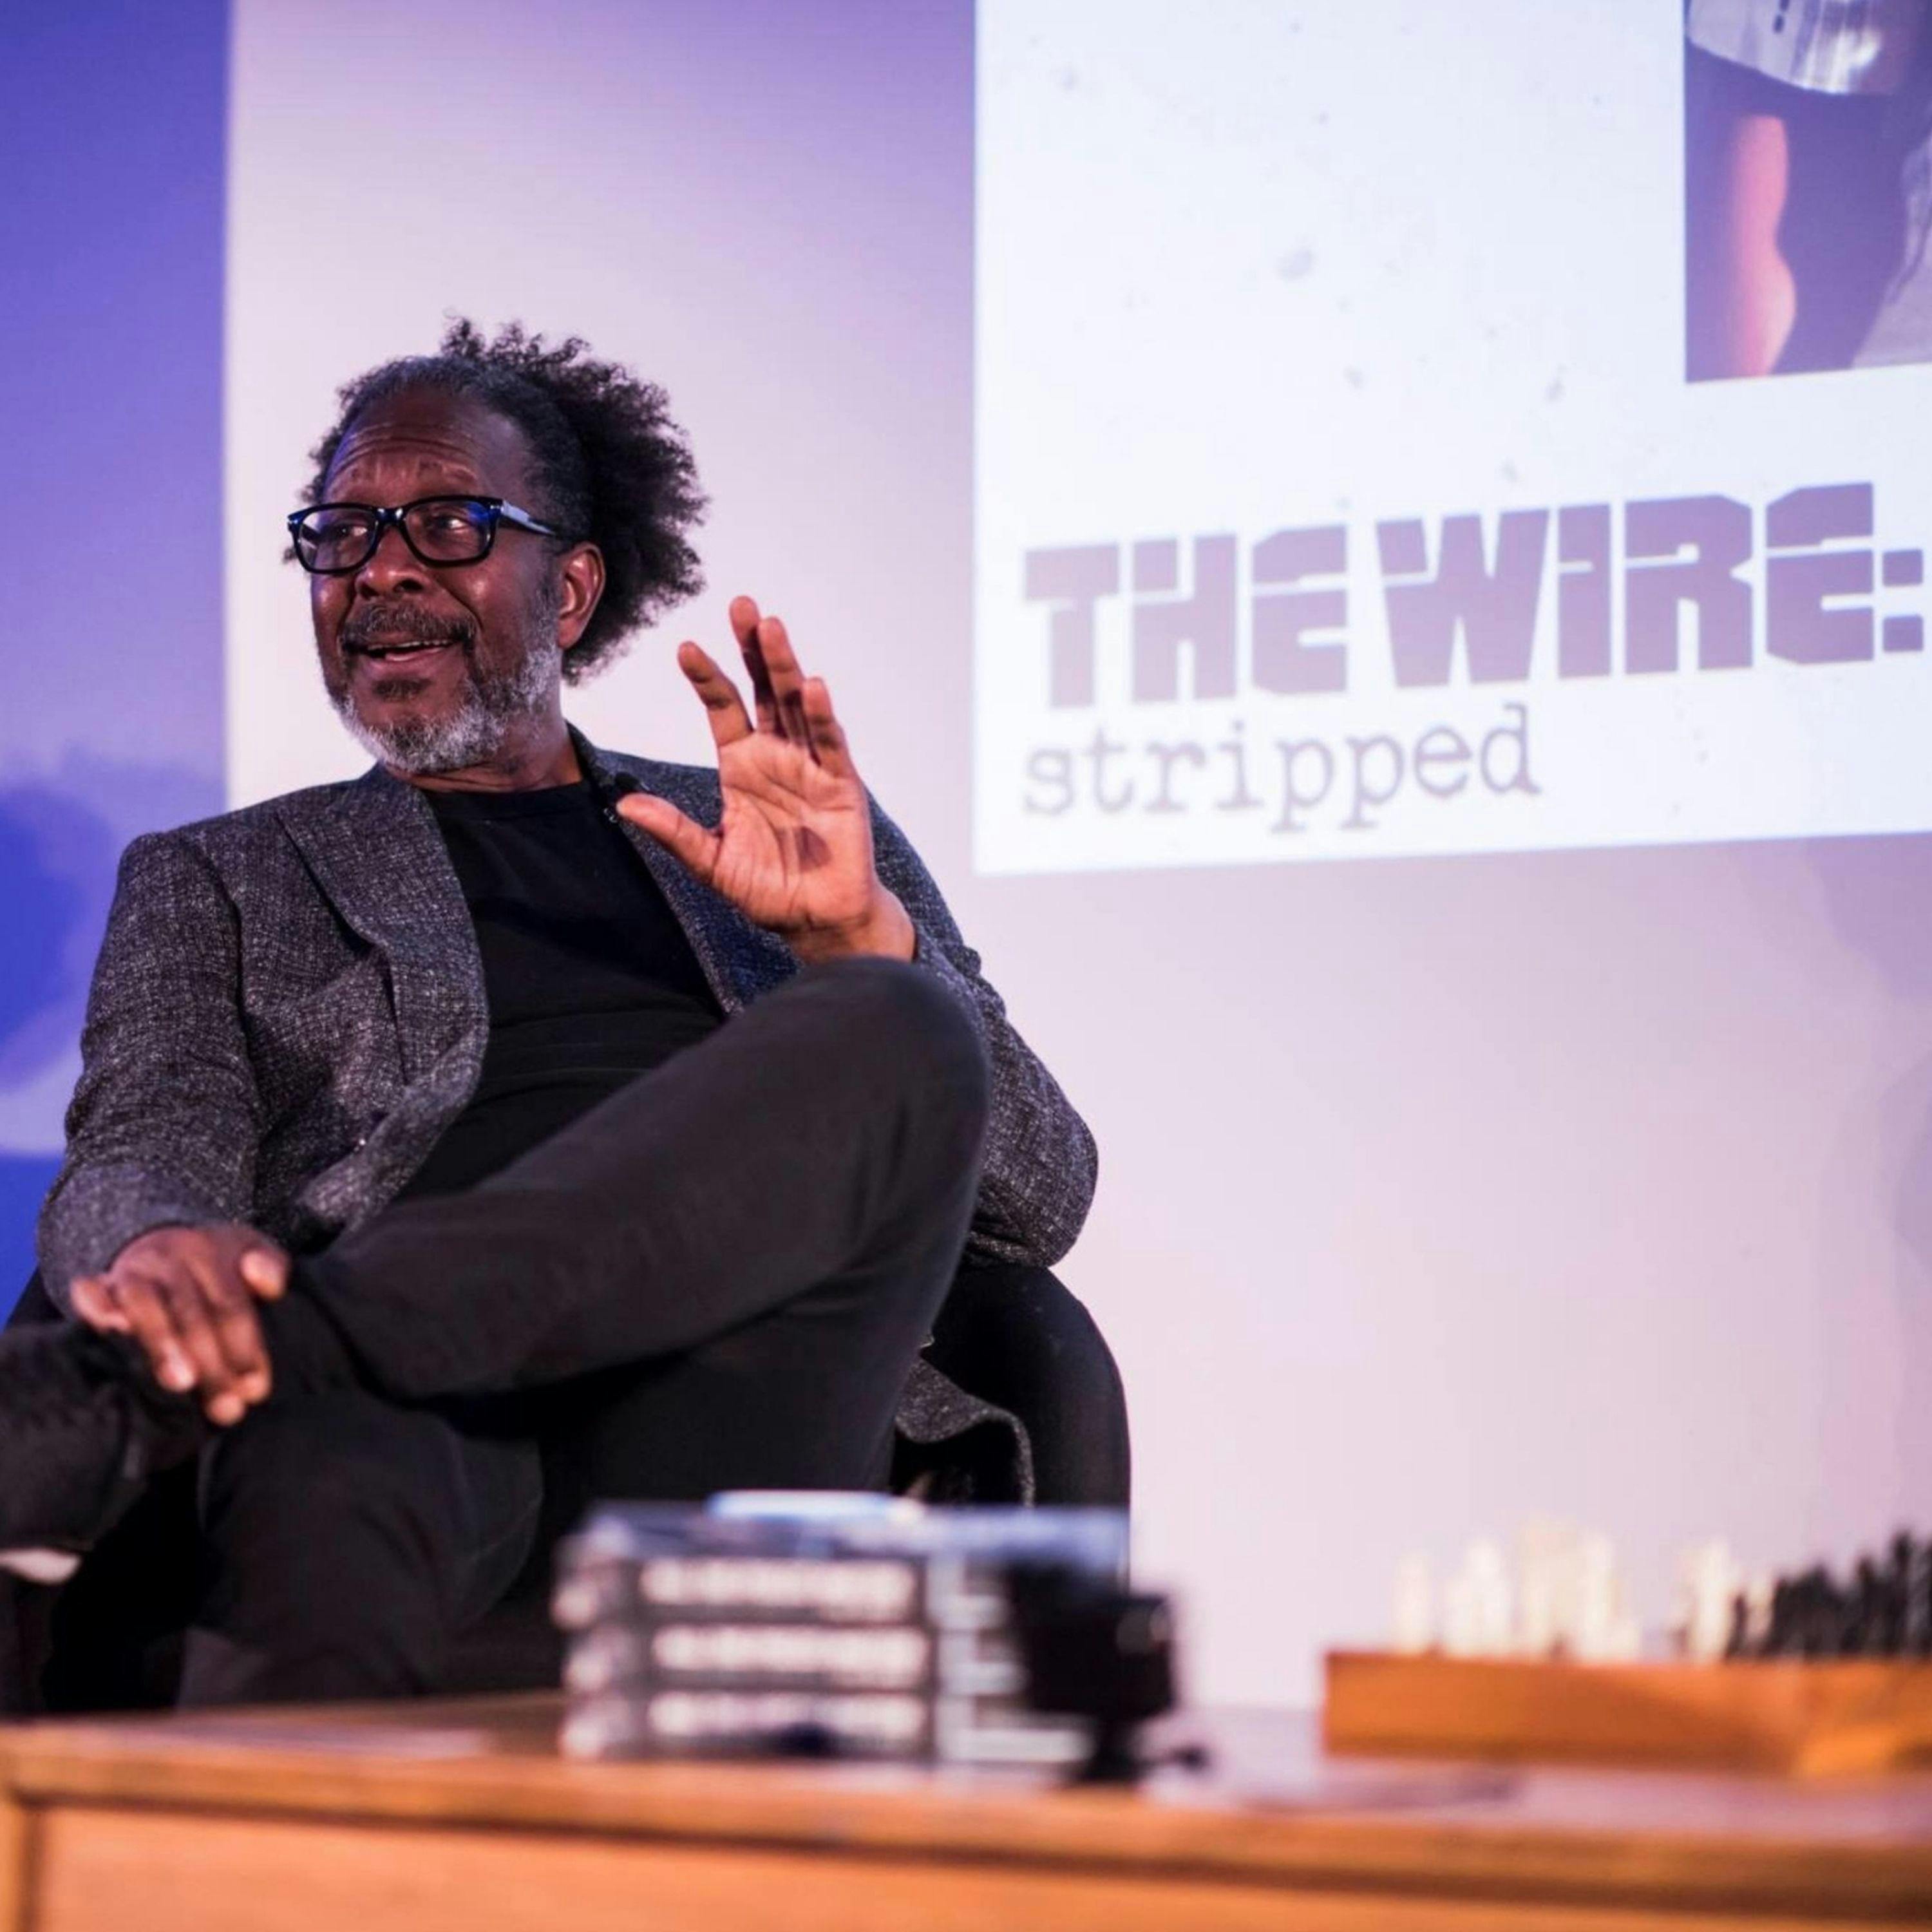 Clarke Peters Live Q&A Show recorded at London Podcast Festival 2018